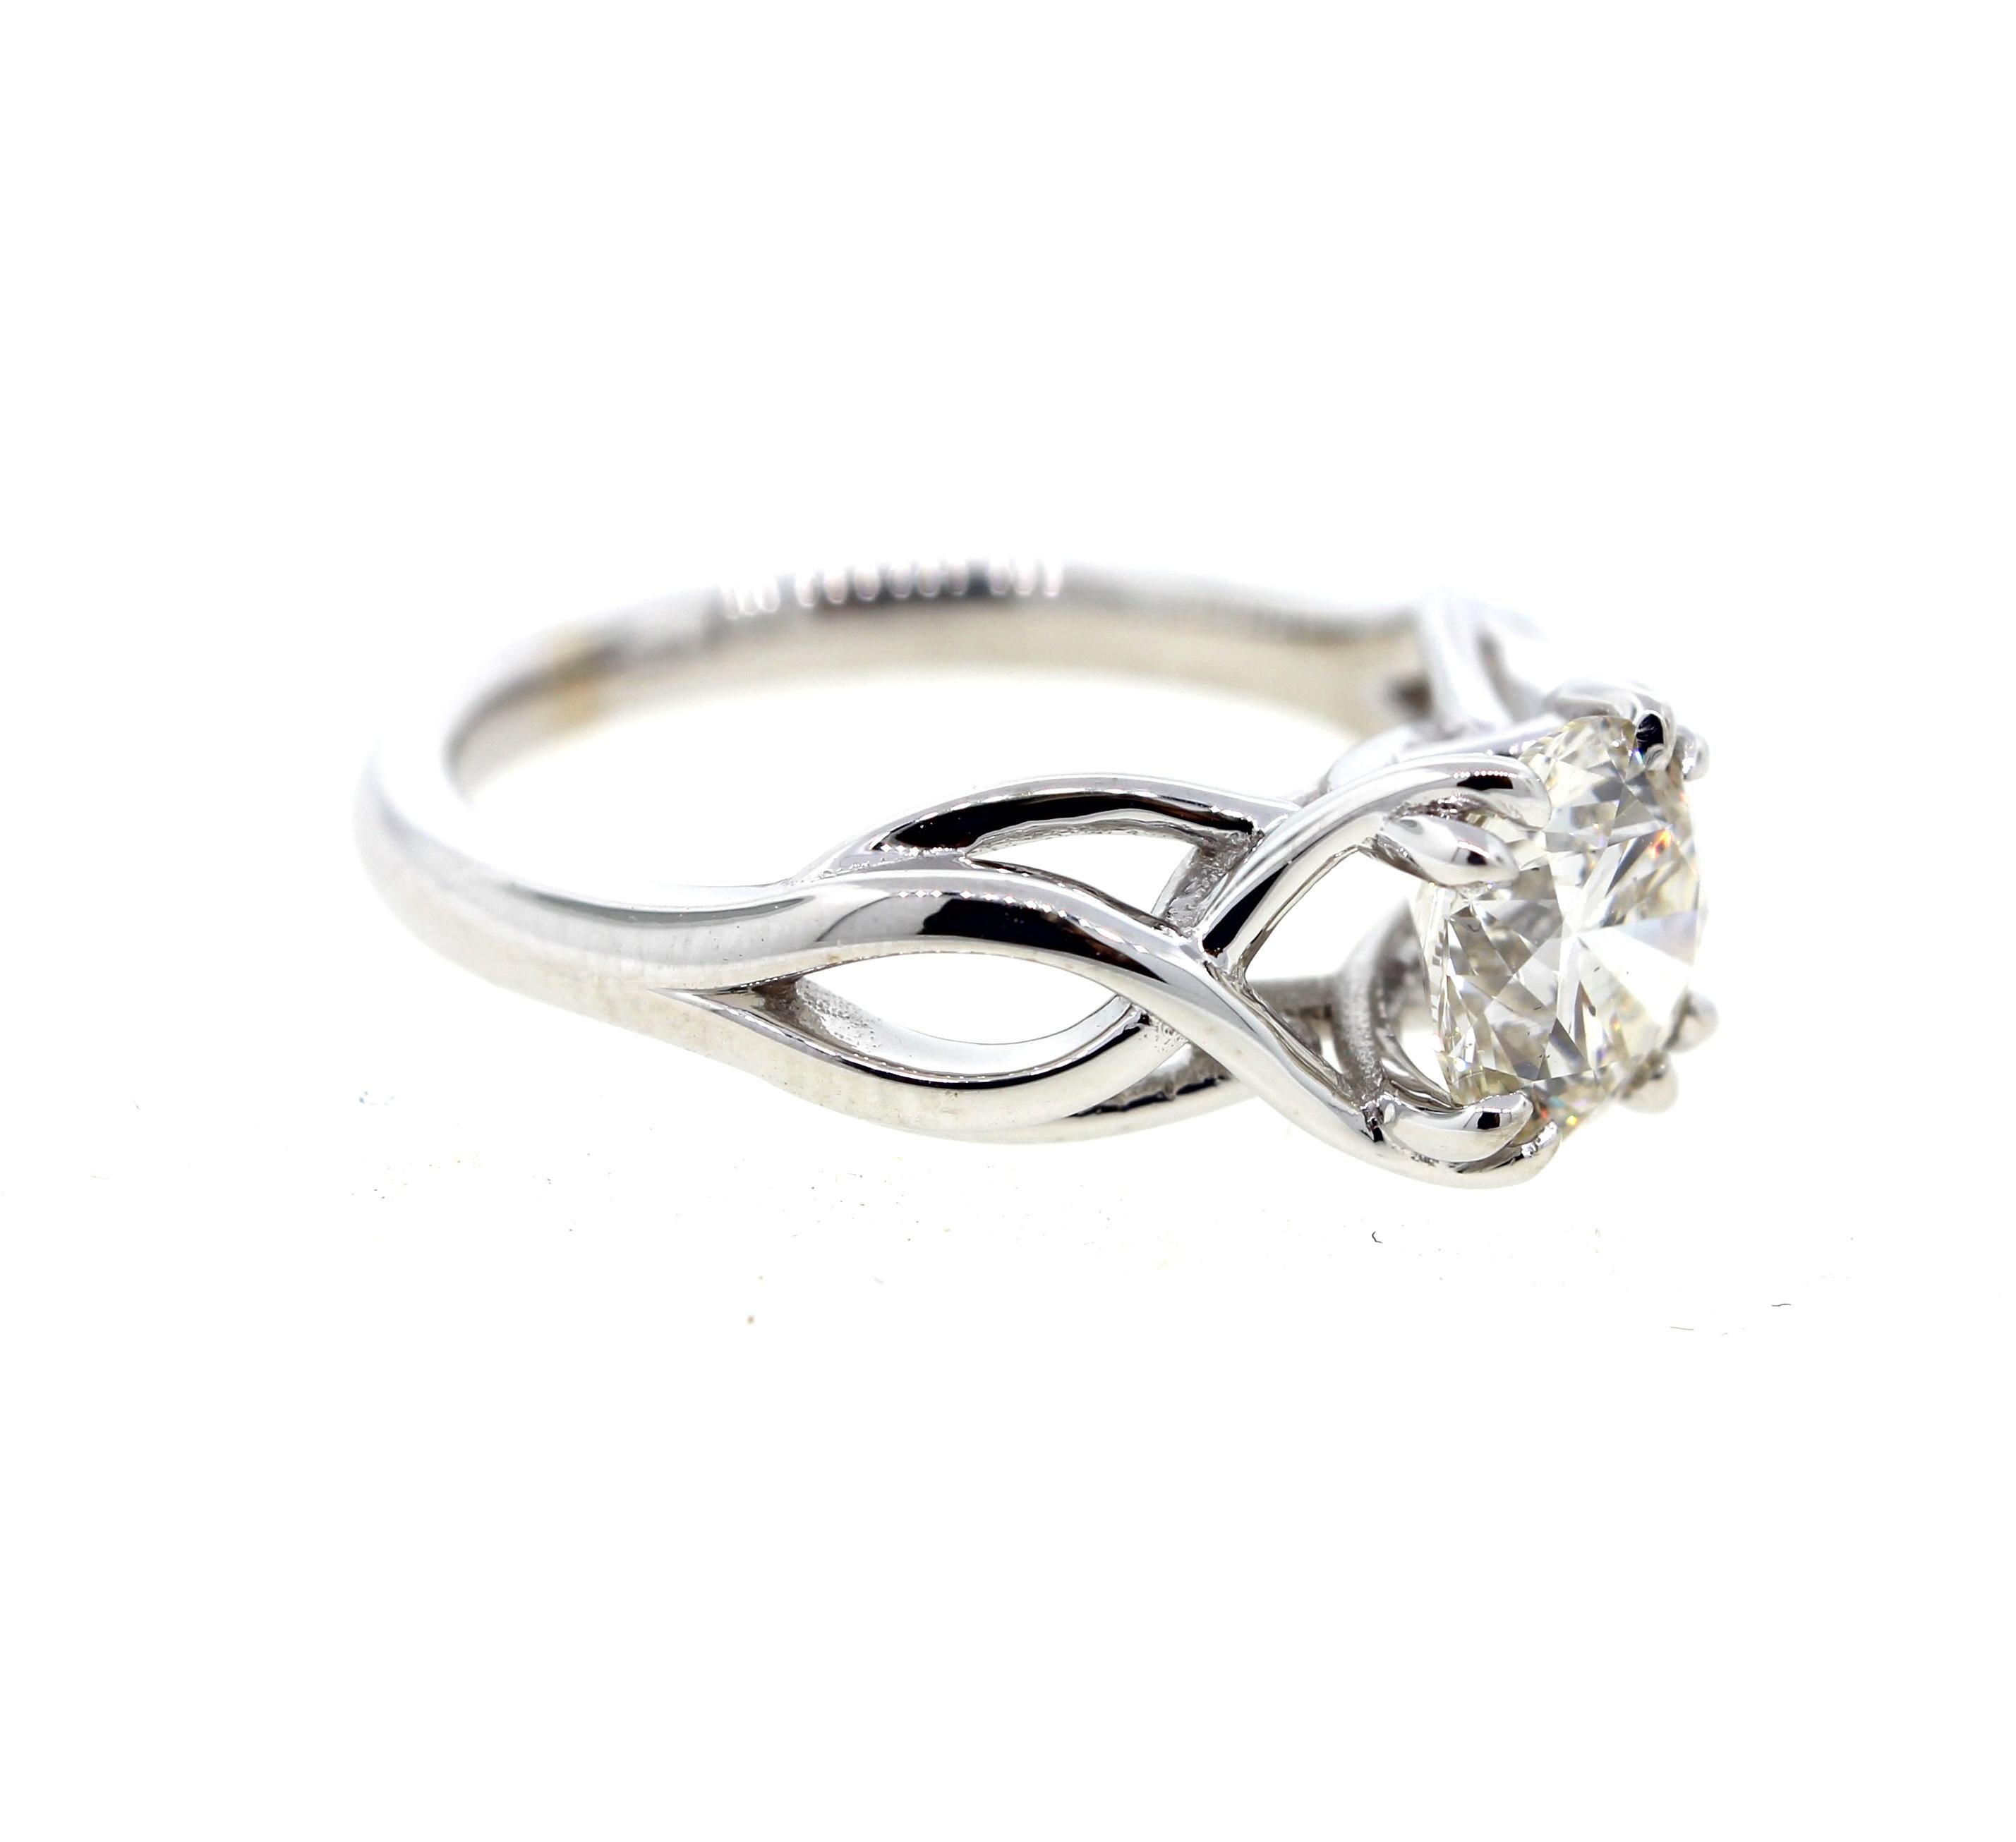 This twisted diamond engagement ring is crafted in 18k white gold, and contains a Round Brilliant Cut Diamond (1.00 carats, H color, and VVS2 clarity).  A classic take on the traditional solitaire, this ring has a matching flush fit wedding band